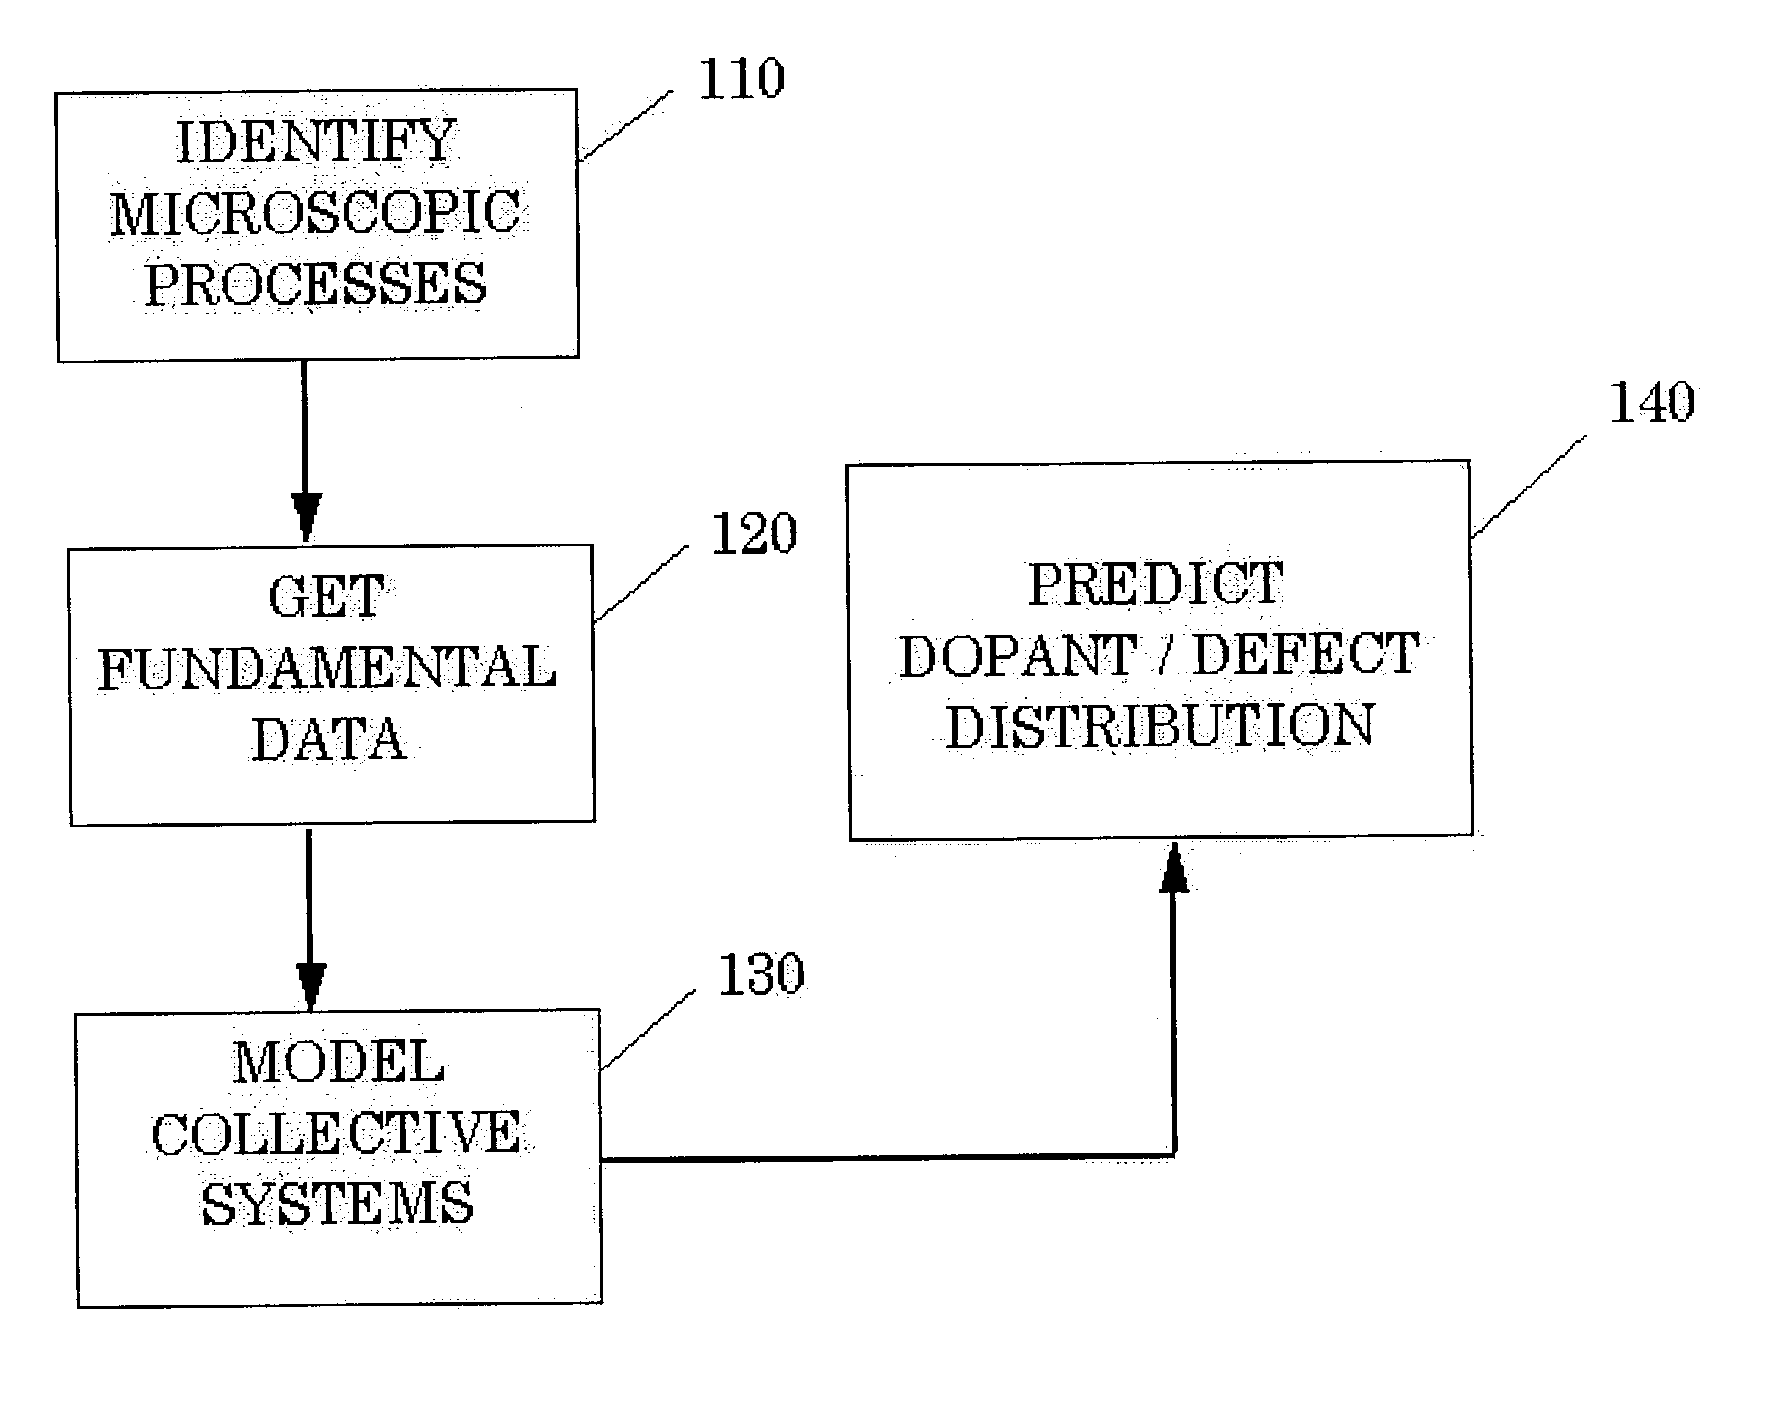 Method for predicting the behavior of dopant and defect components